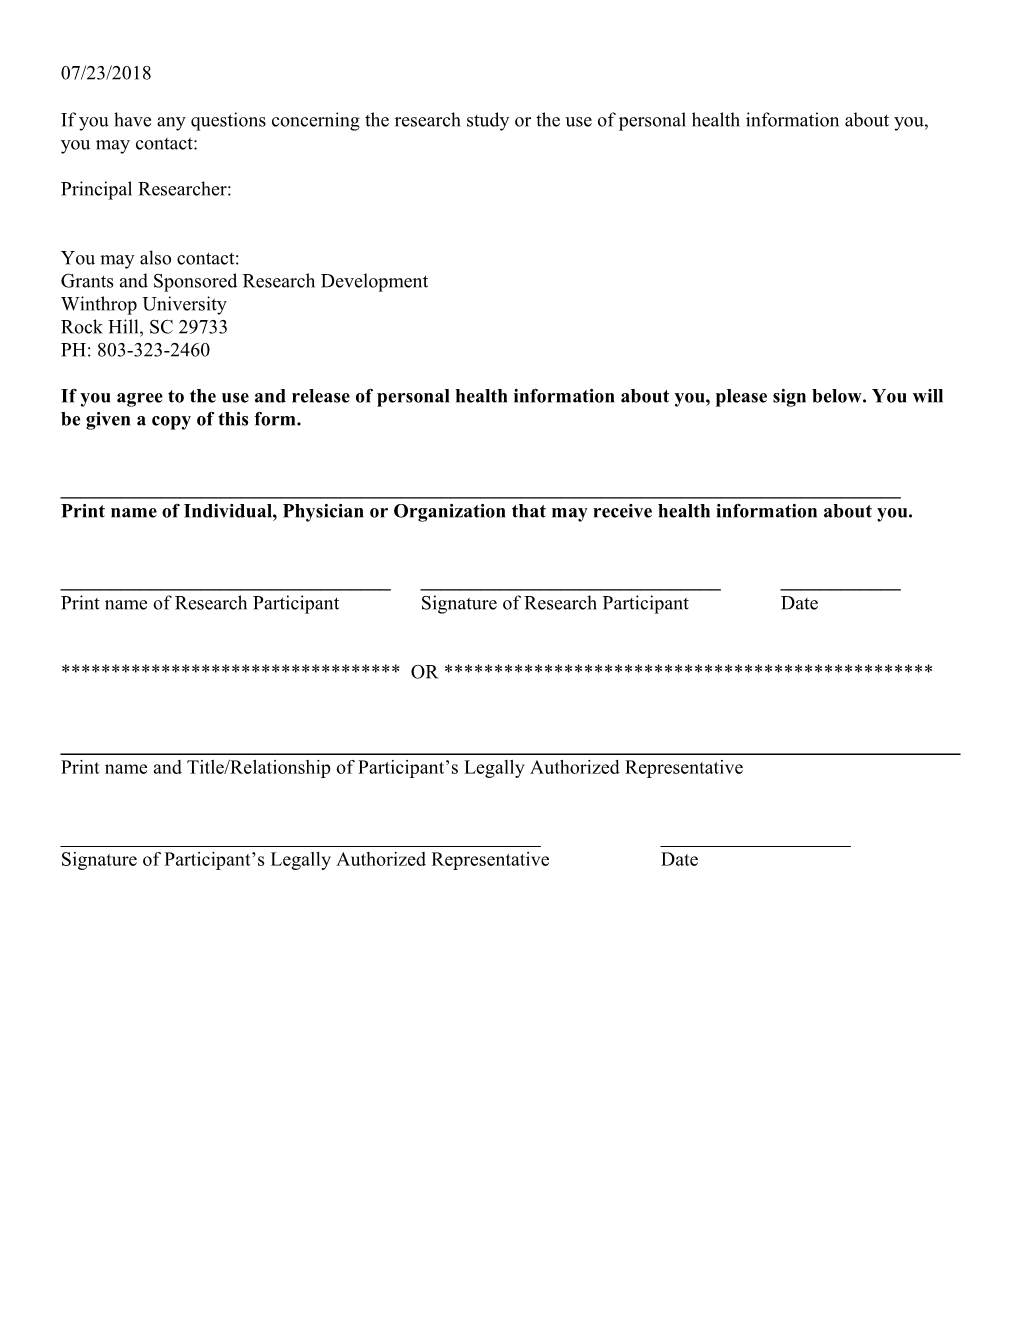 Authorization to Use Protected Health Information for Research